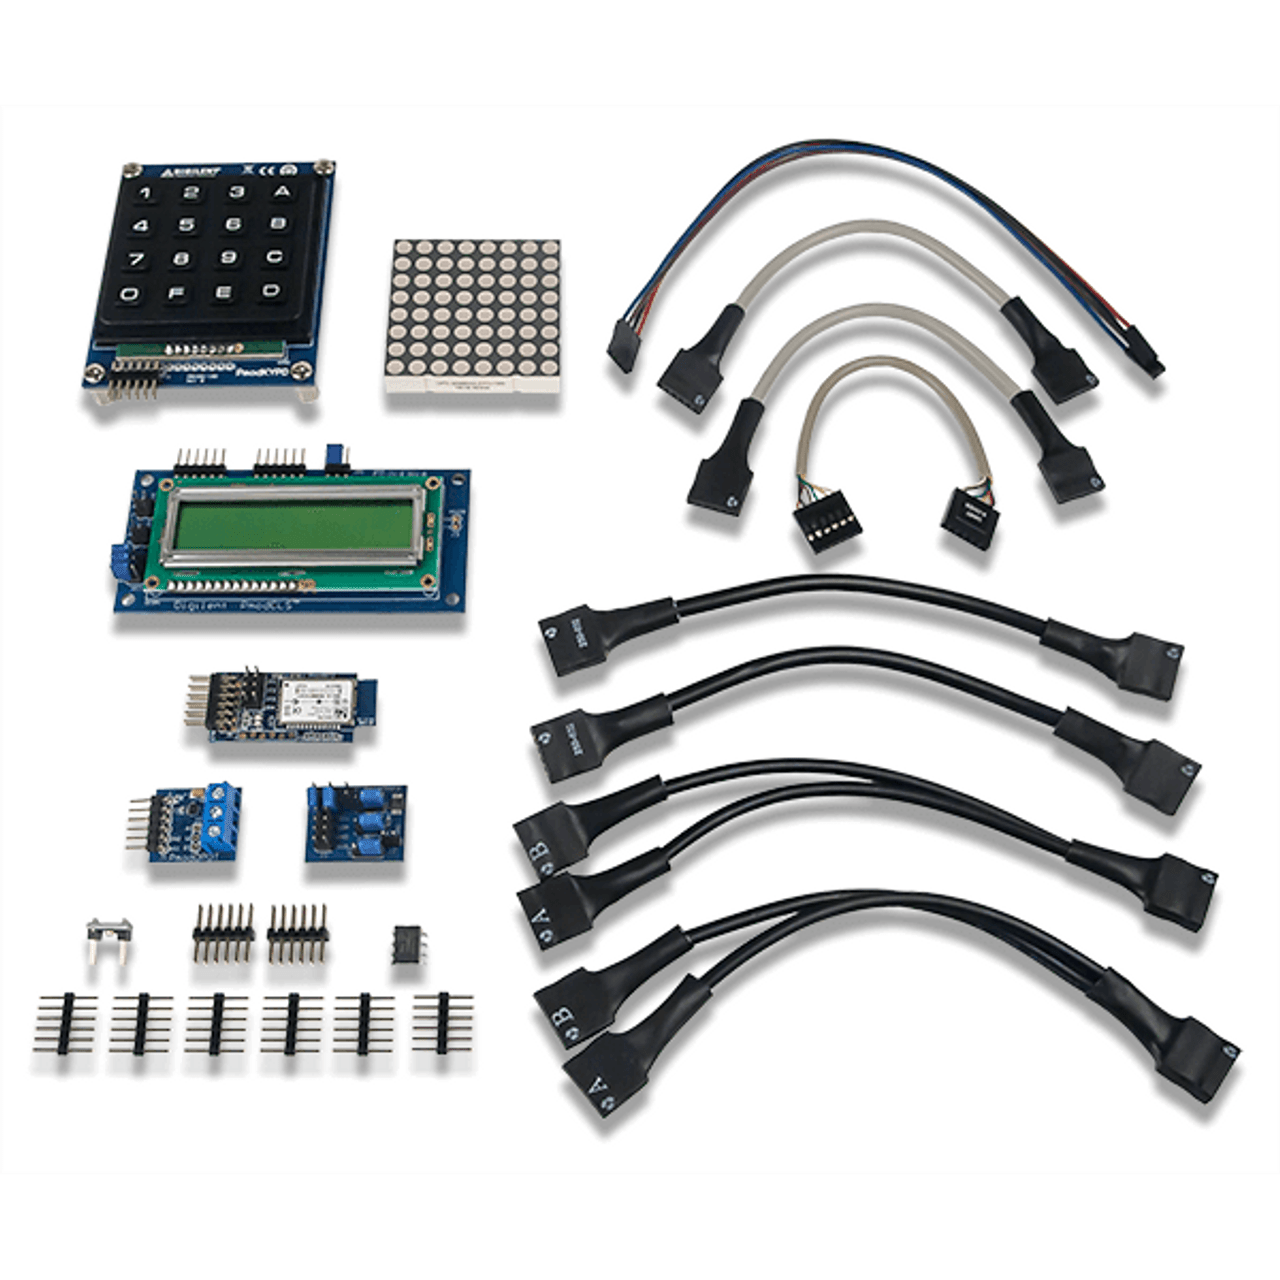 https://cdn11.bigcommerce.com/s-7gavg/images/stencil/1280x1280/products/467/4144/myRIO_Embedded_Systems_Accessory_Kit_-_Kit_Pic_-_600__41003.1670977716.png?c=2